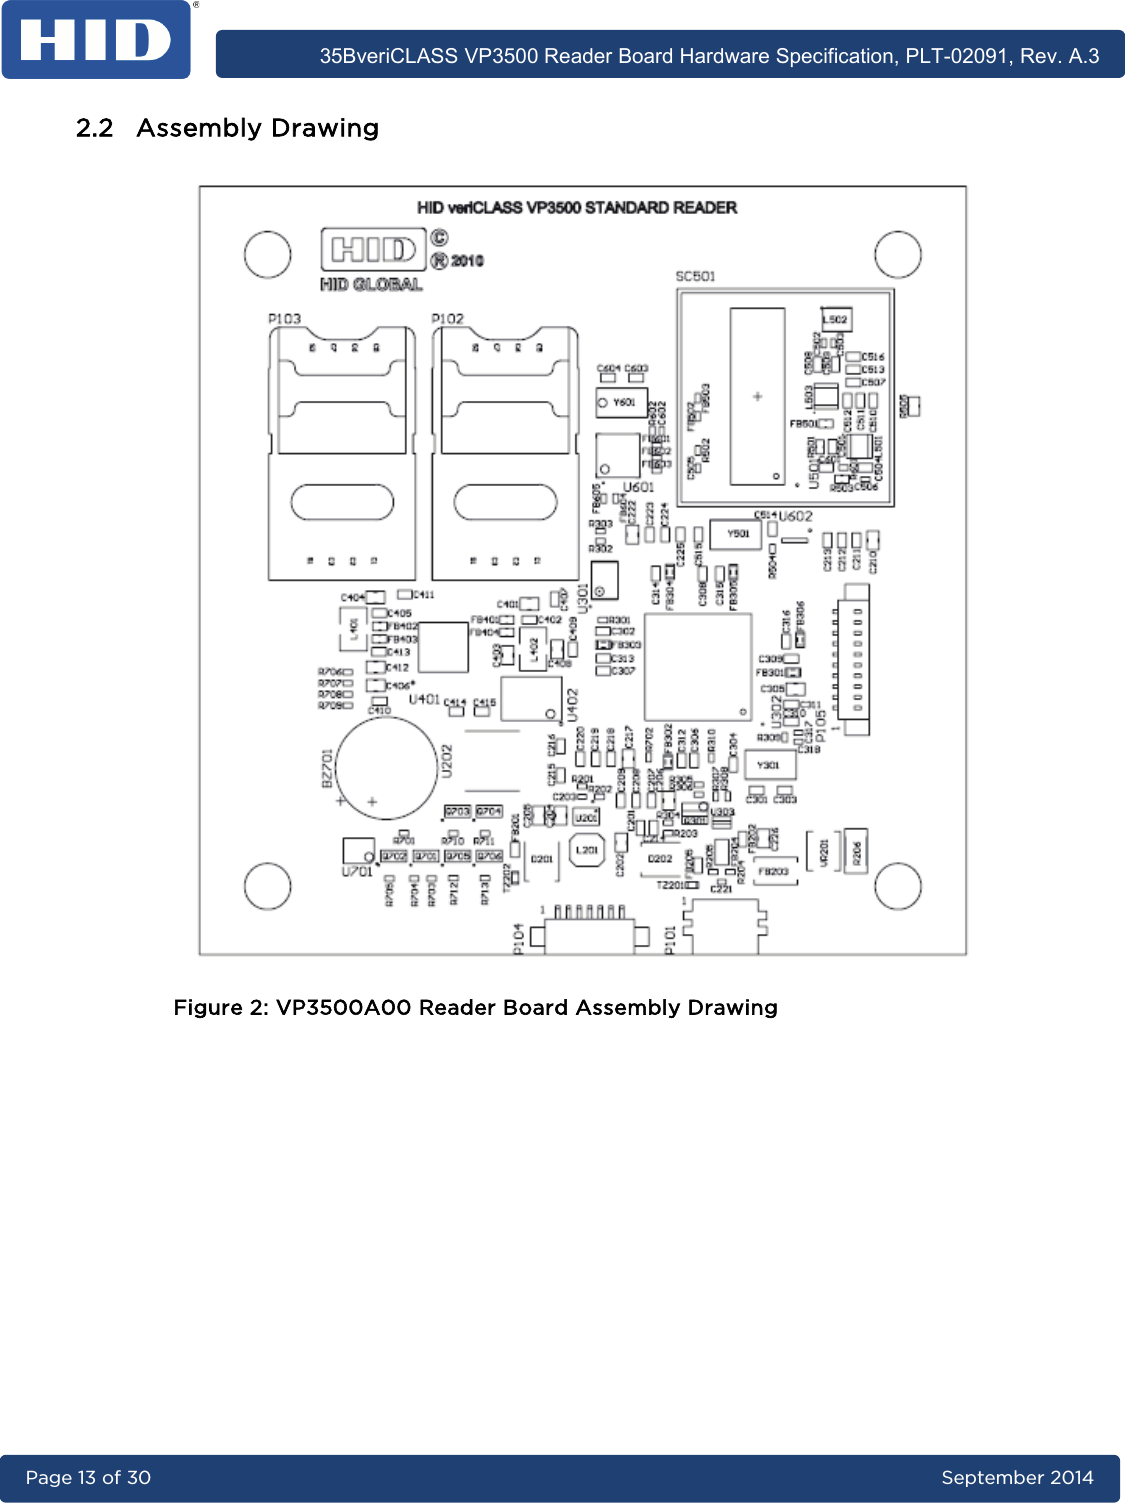      35BveriCLASS VP3500 Reader Board Hardware Specification, PLT-02091, Rev. A.3 Page 13 of 30   September 2014  2.2 Assembly Drawing   Figure 2: VP3500A00 Reader Board Assembly Drawing       